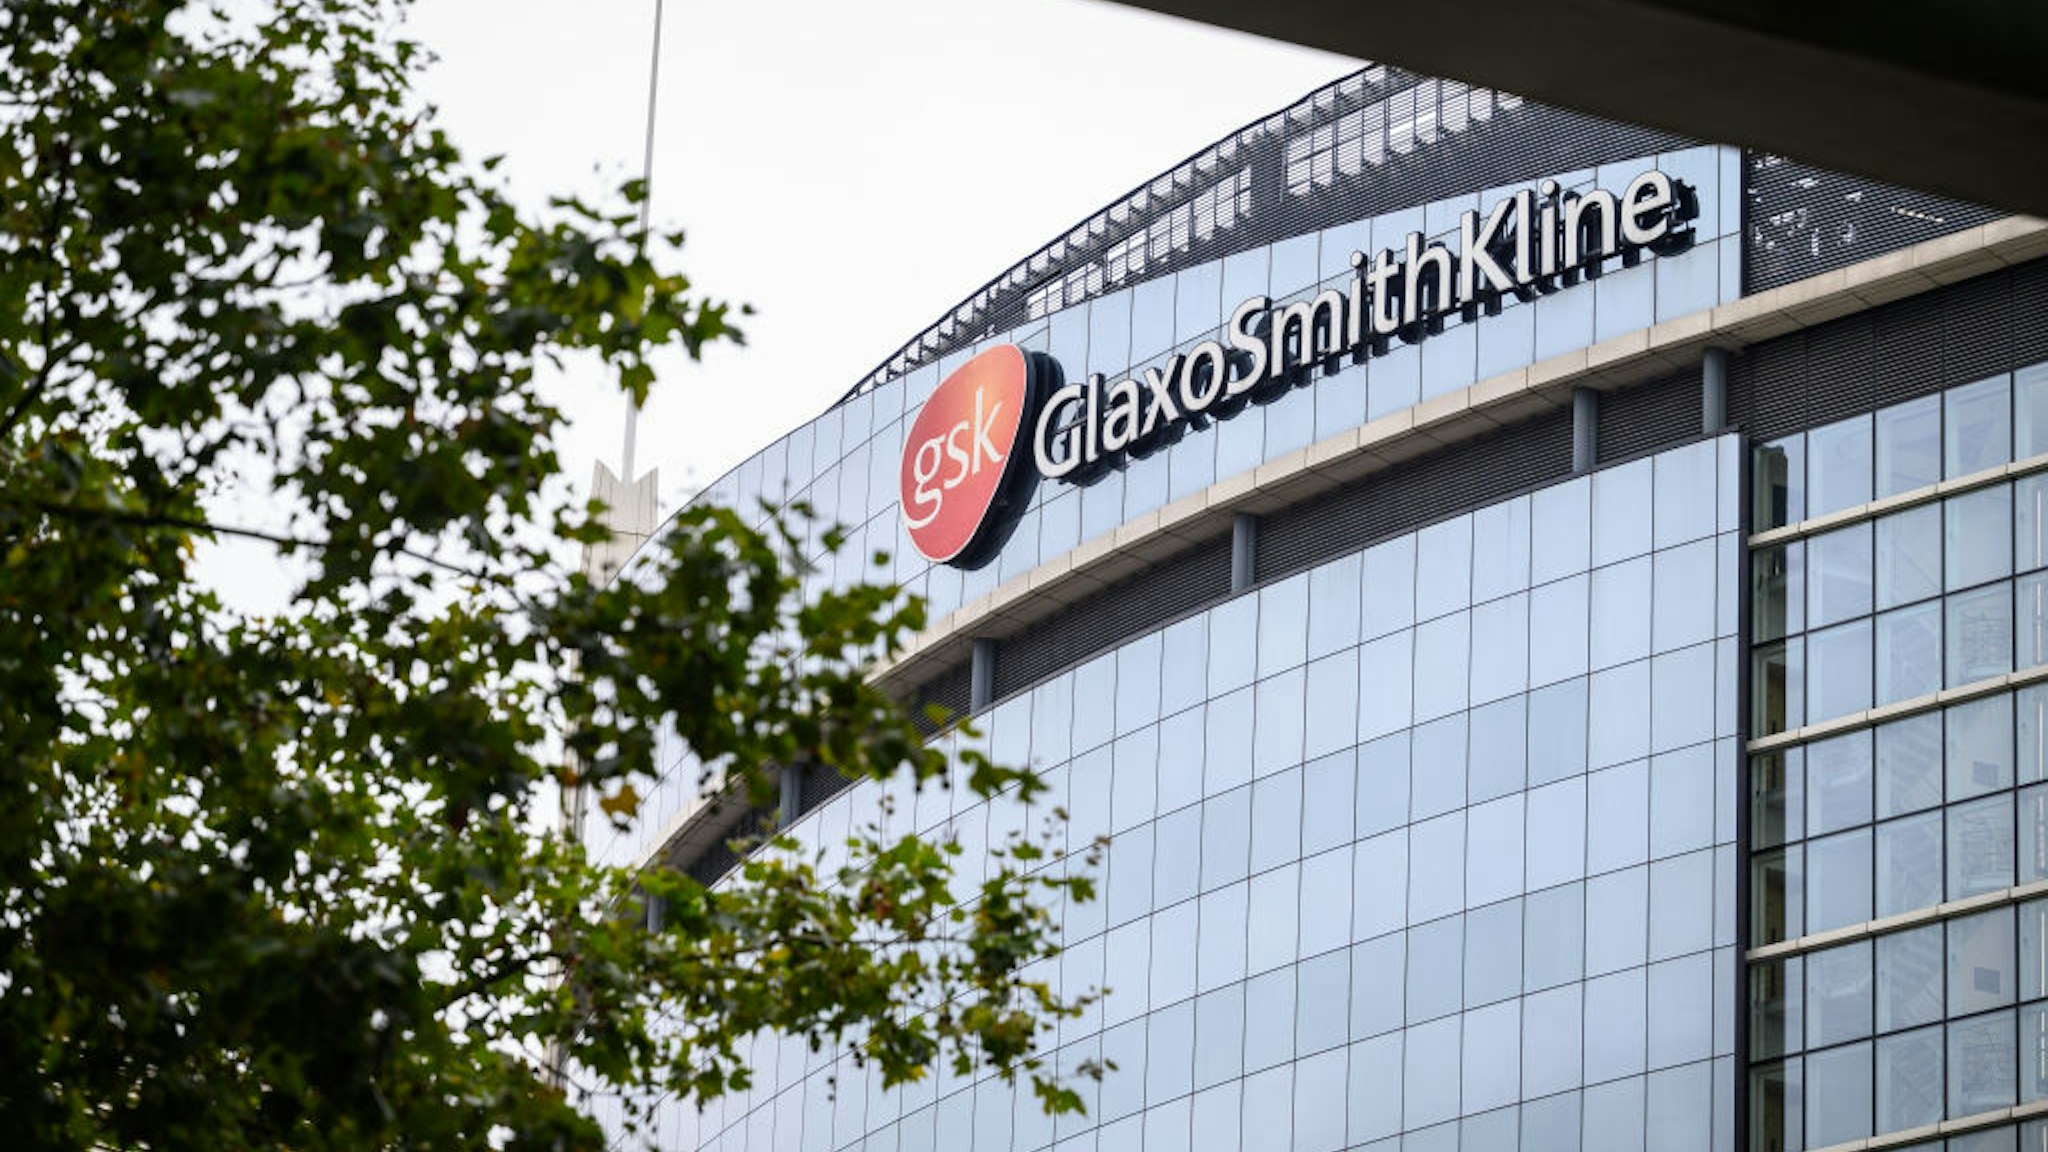 BRENTFORD, ENGLAND - OCTOBER 07: A general view of the exterior of the GlaxoSmithKline offices on October 07, 2021 in the Brentford area of London, England. Yesterday, the World Health Organization endorsed the company's malaria vaccine, Mosquirix, the first developed for any parasitic disease.